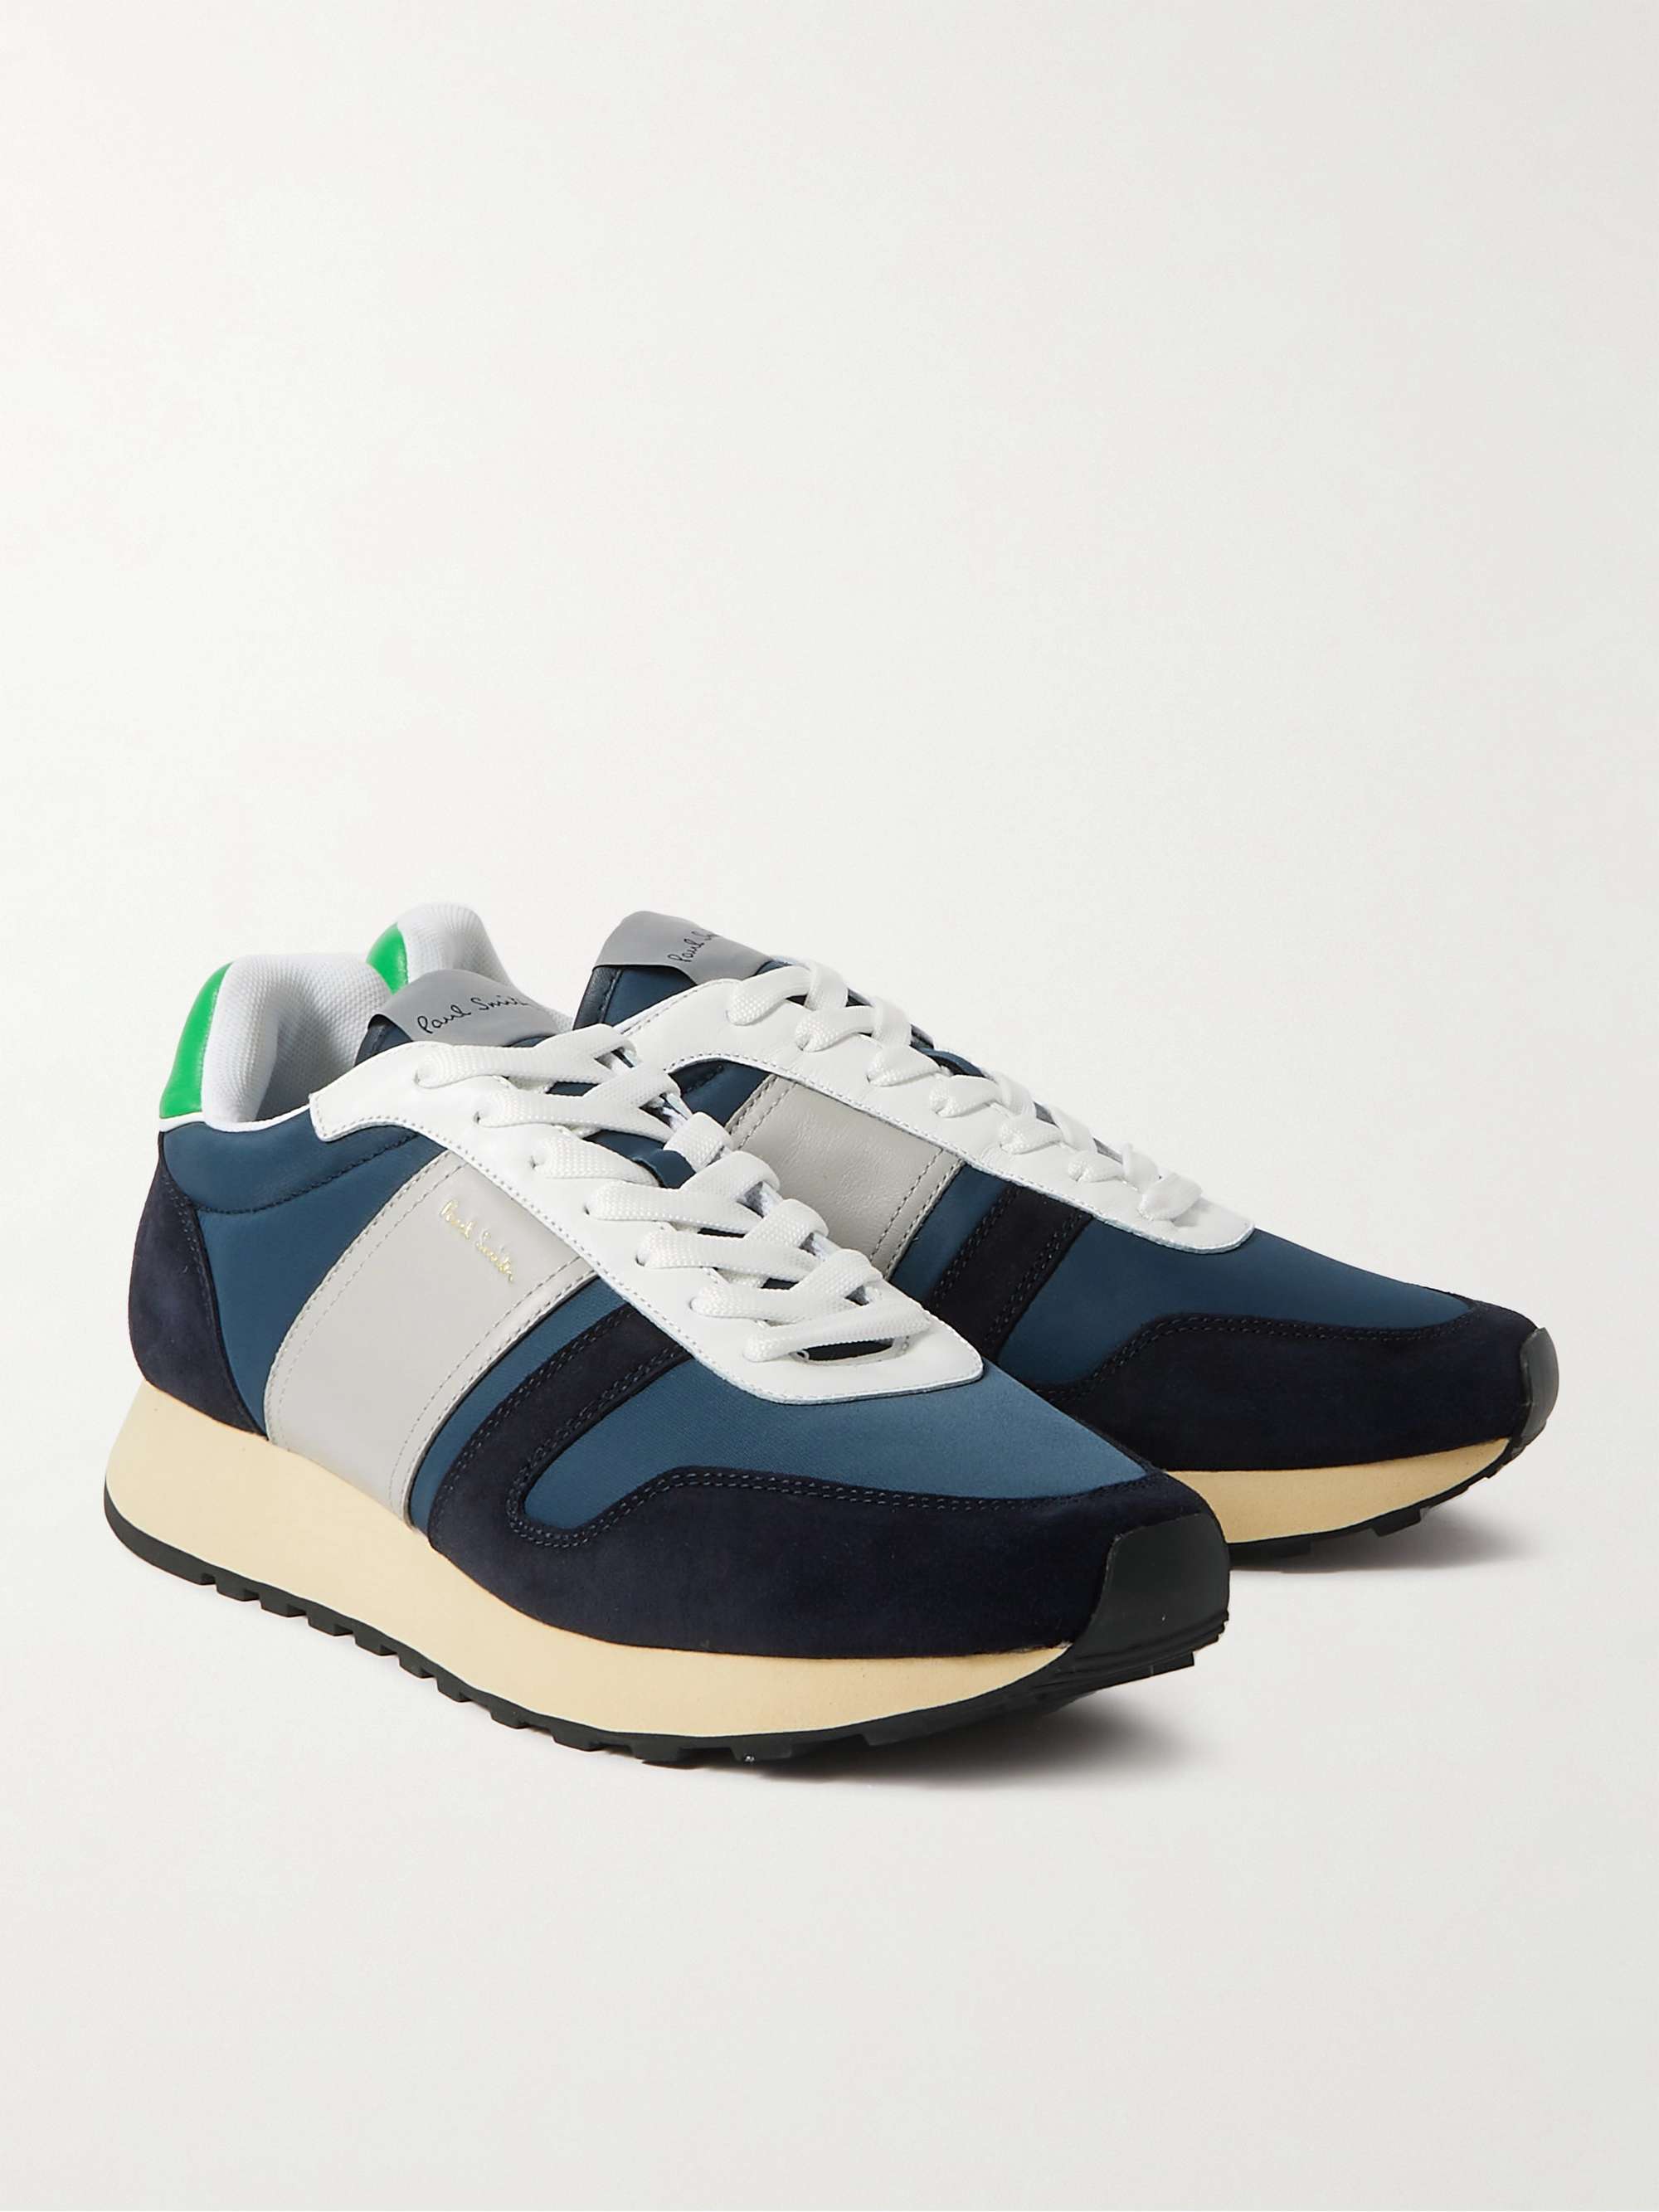 PAUL SMITH Eighties Leather and Suede-Trimmed Canvas Sneakers | MR PORTER